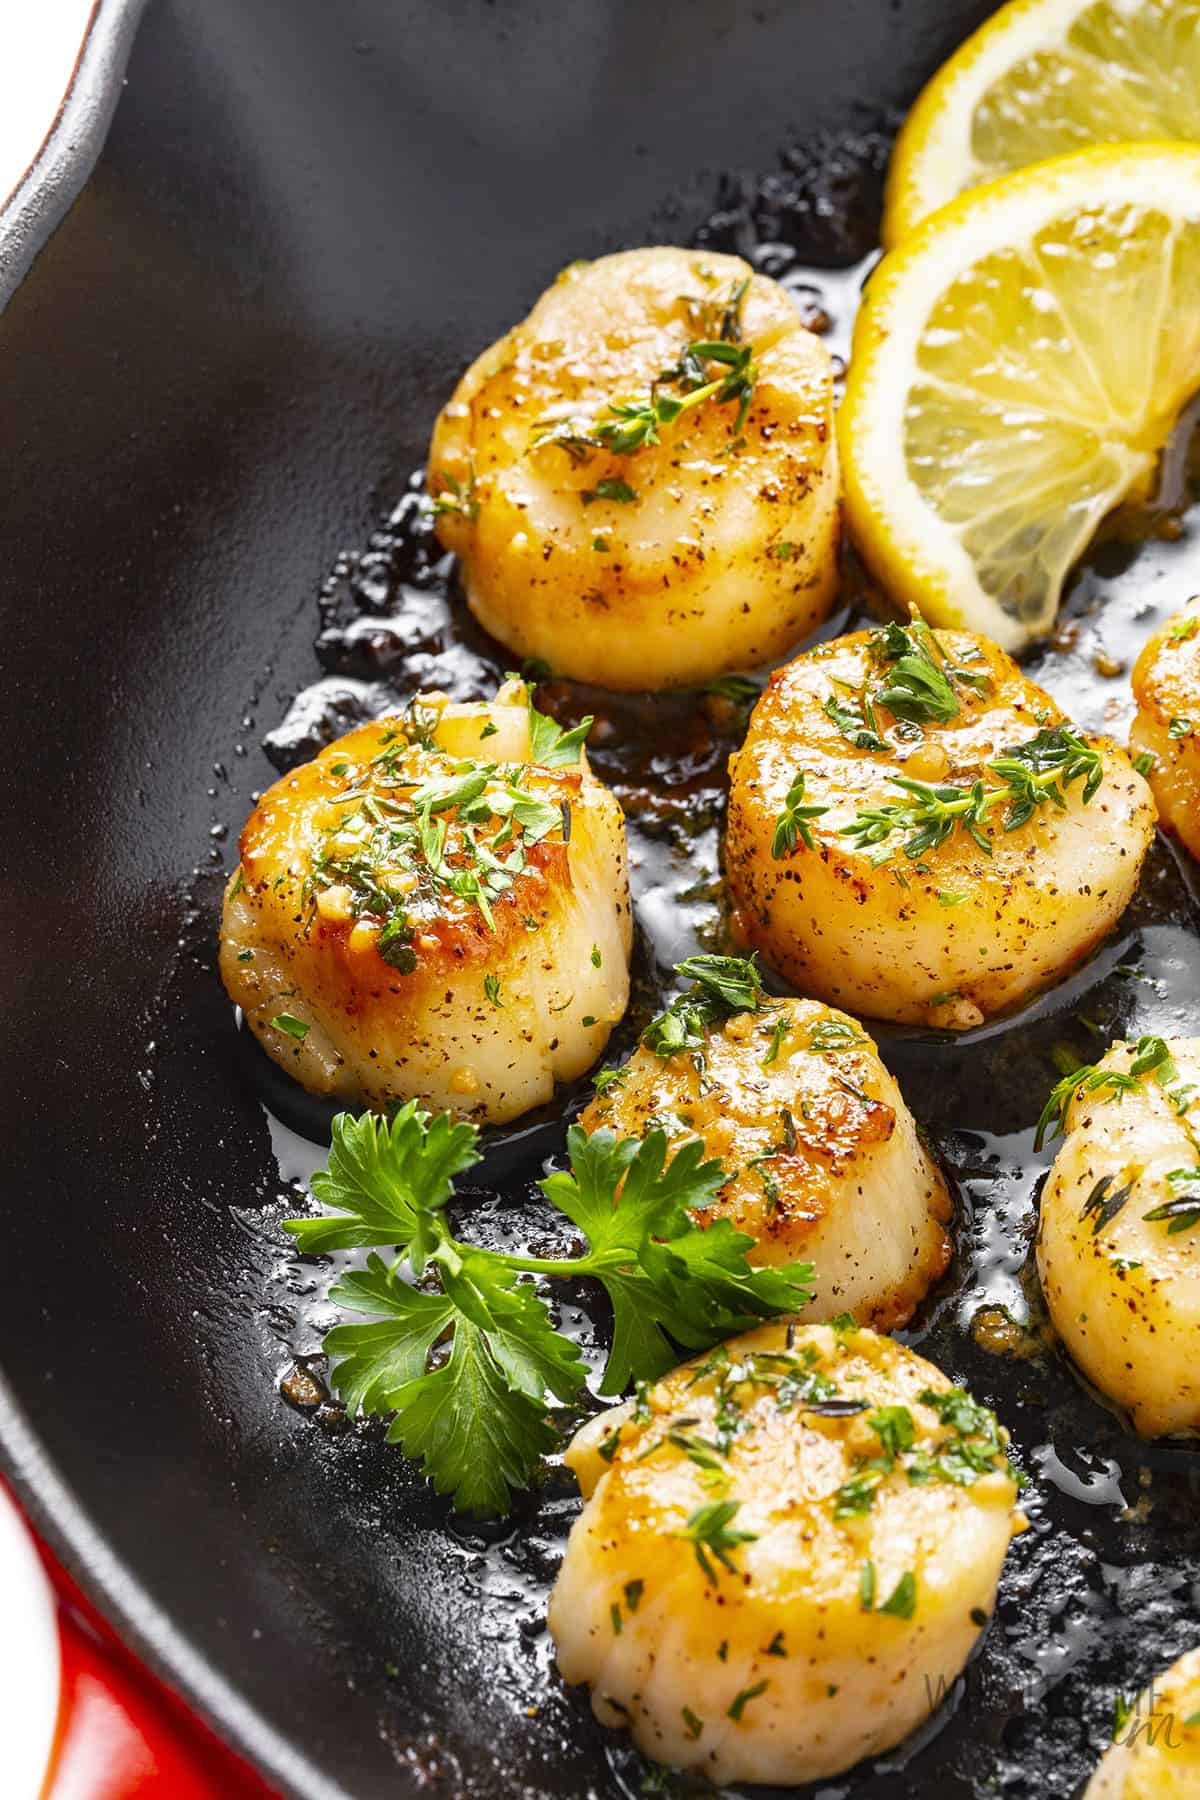 Skillet with seared sea scallops and lemon